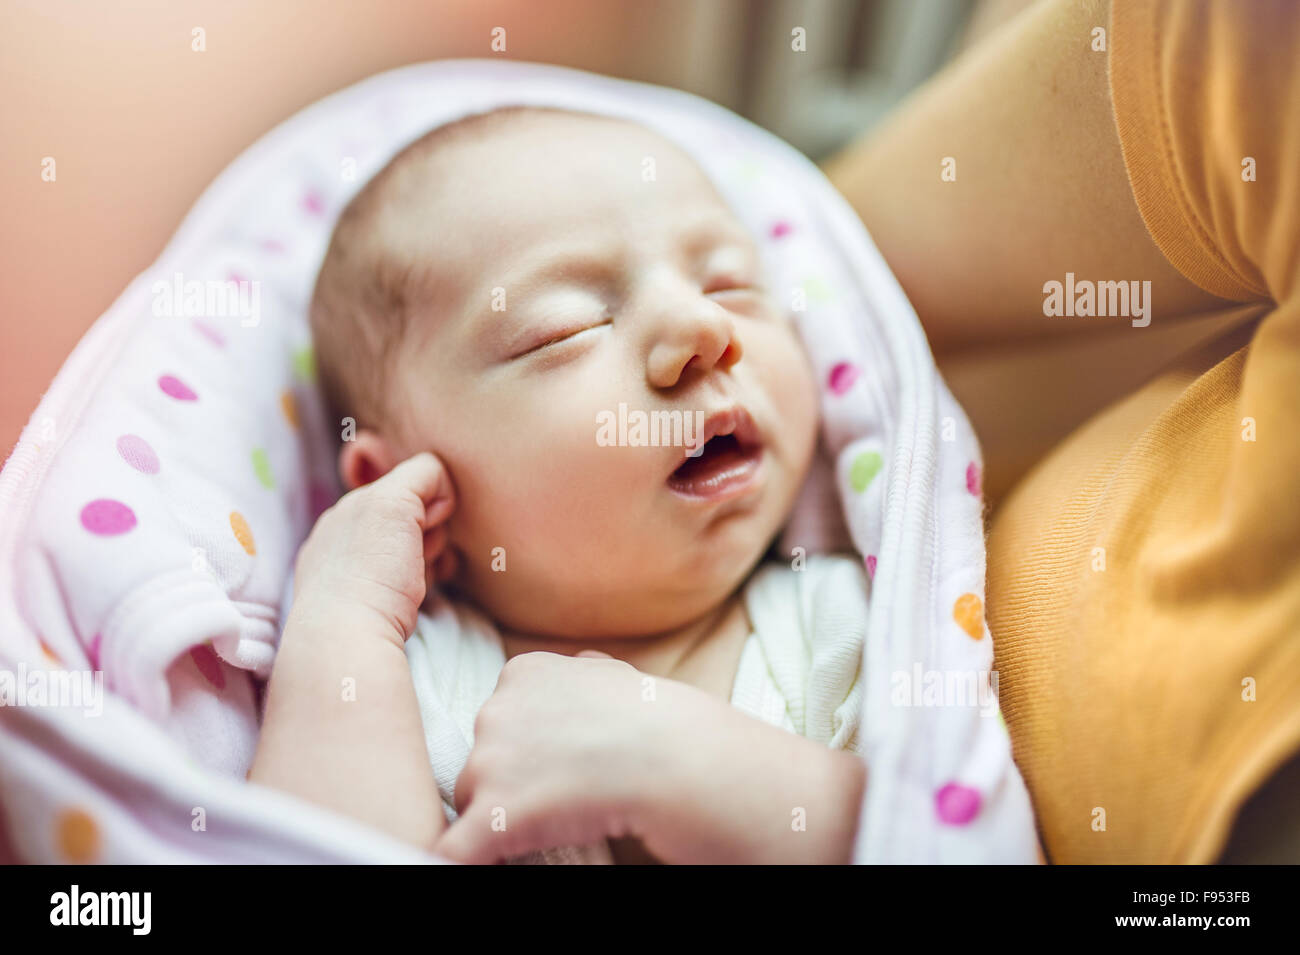 Cute sleeping baby on the bed indoors Stock Photo